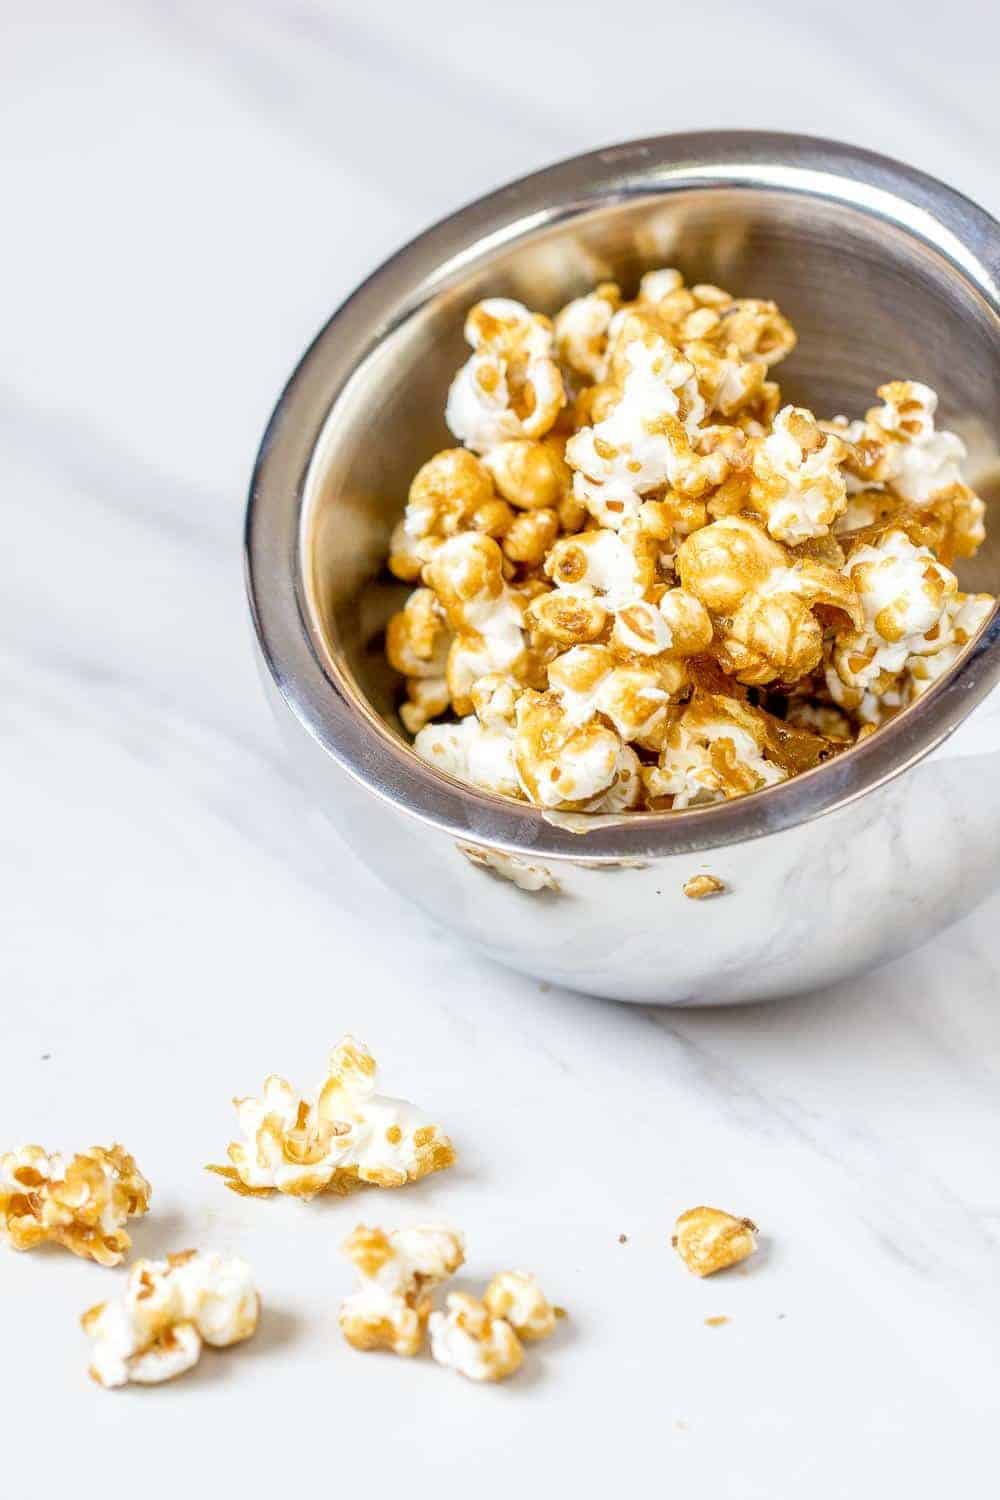 You won't be able to stop snacking on this smoked salt caramel corn!